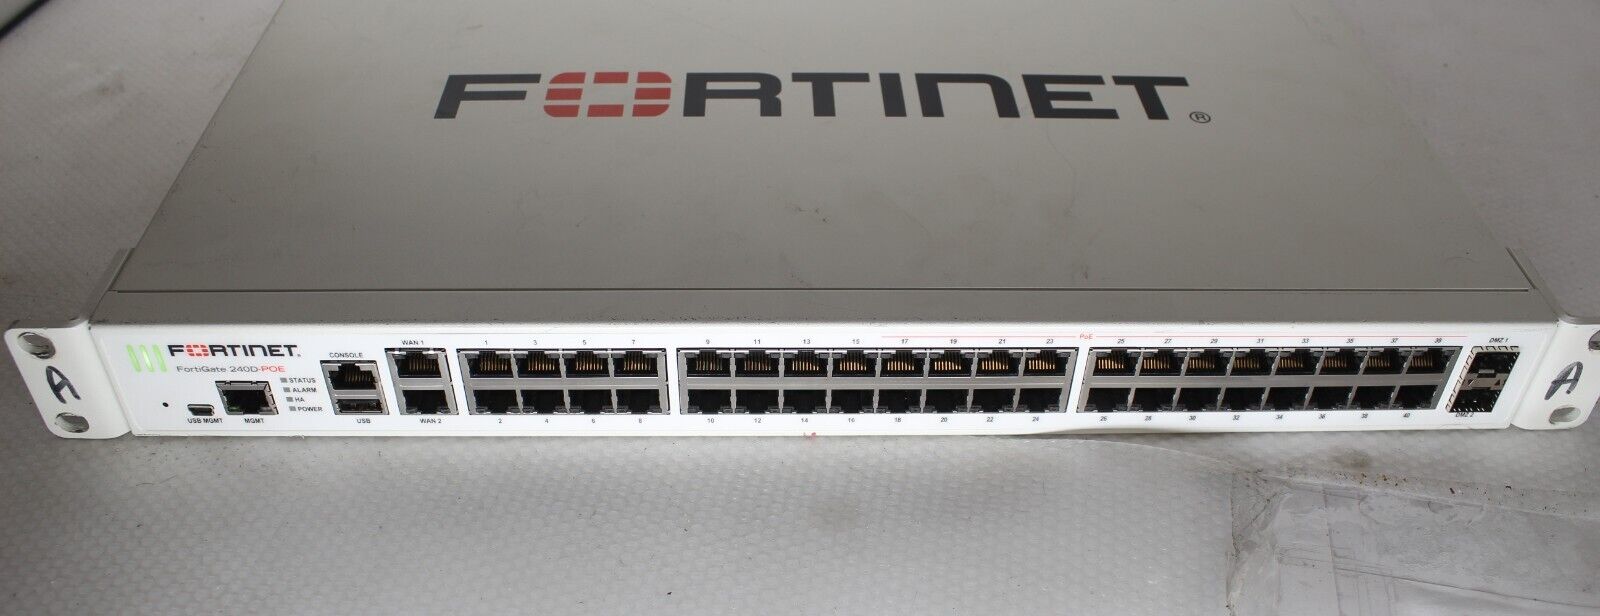 Fortinet FG-240D-POE FortiGate 240D Security Firewall Appliance